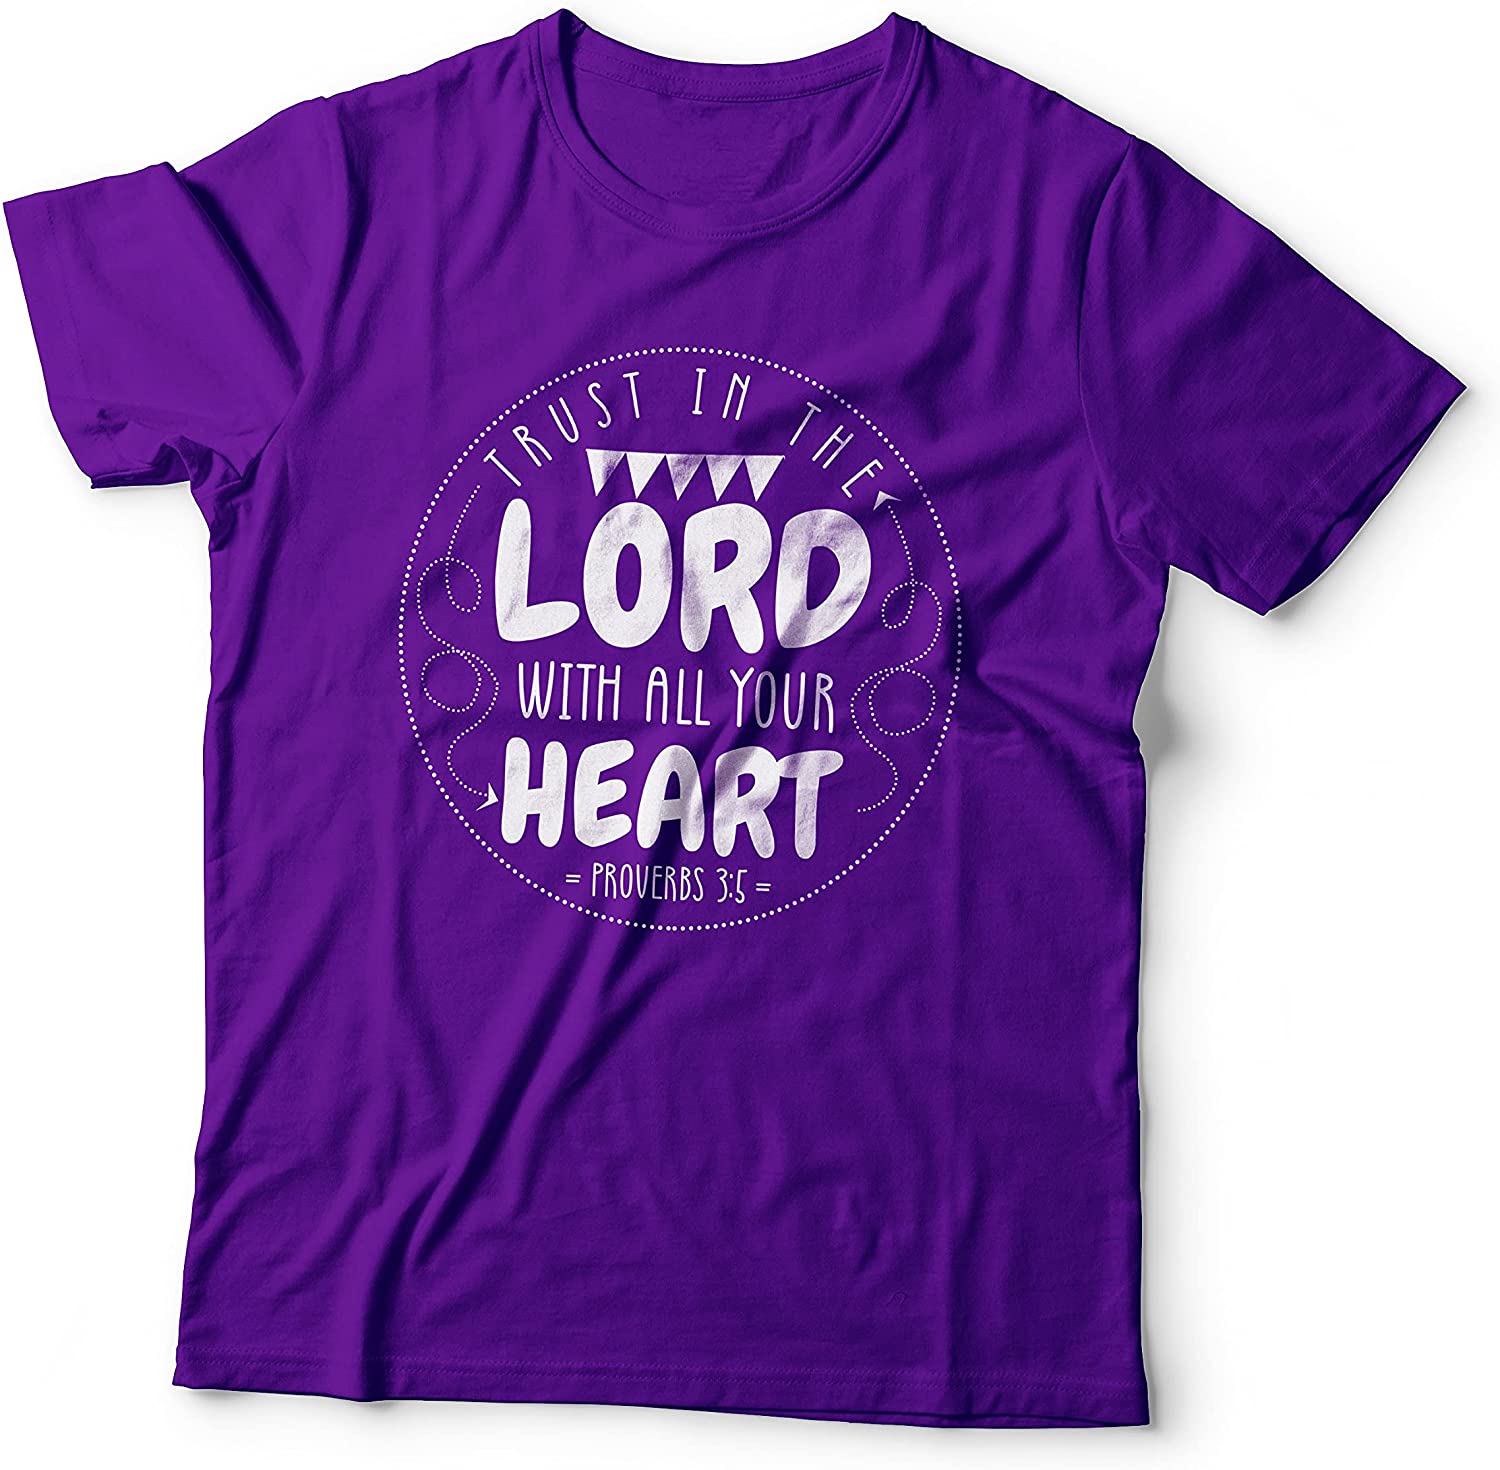 Trust In The Lord With All Your Heart Proverbs 3-5 Religious Christian T-shirt Purple-Large